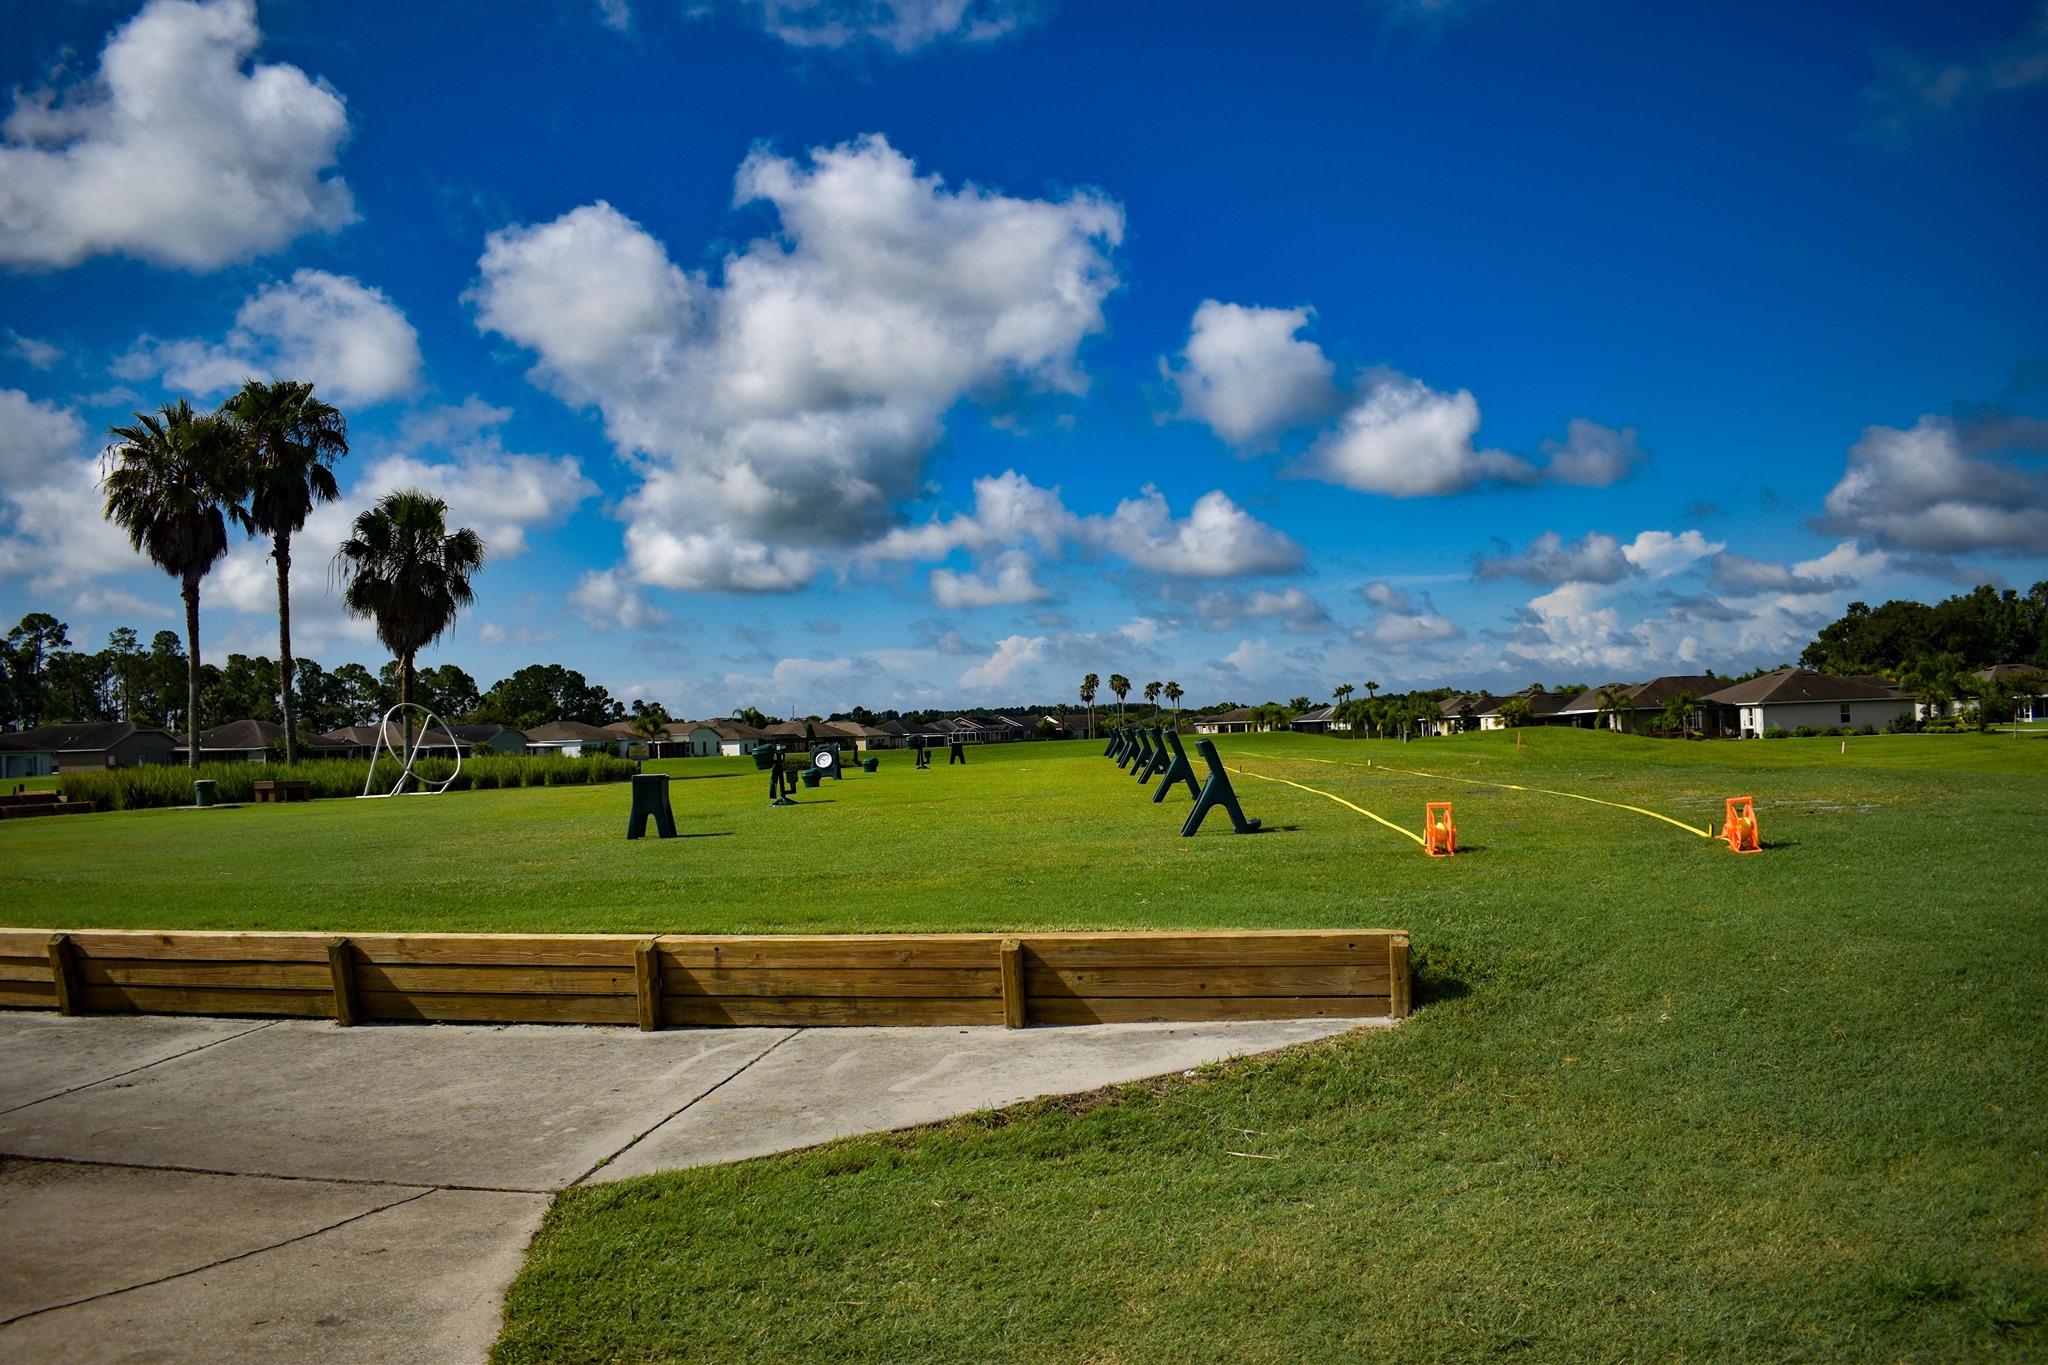 There is a practice area for golfers there - Tampa Bay Golf and Country Club